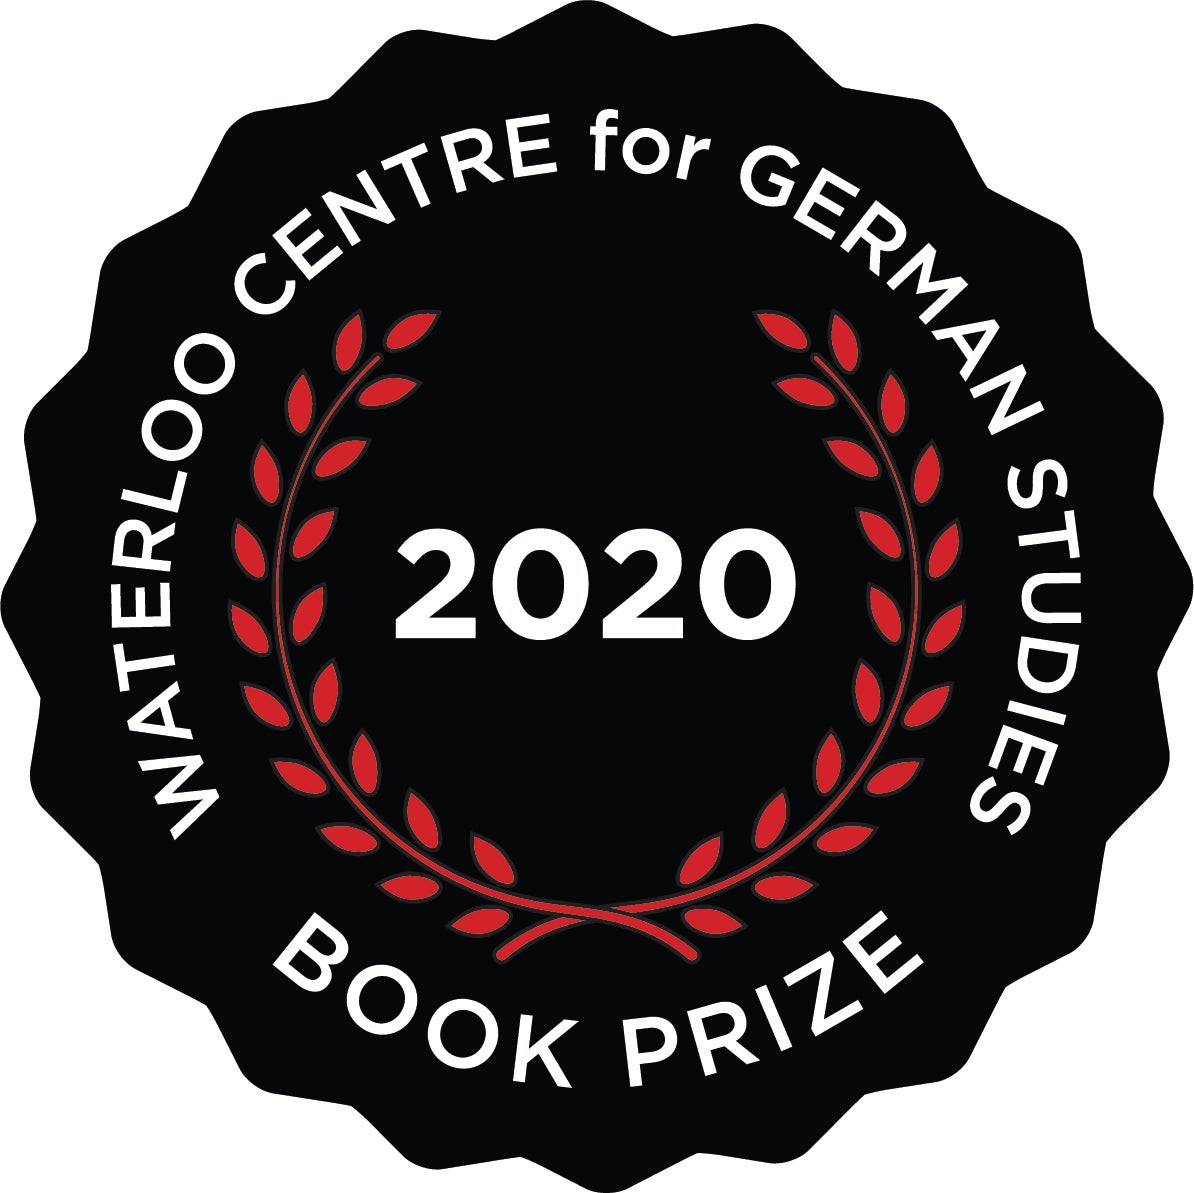 Seal for WCGS Book Prize 2020